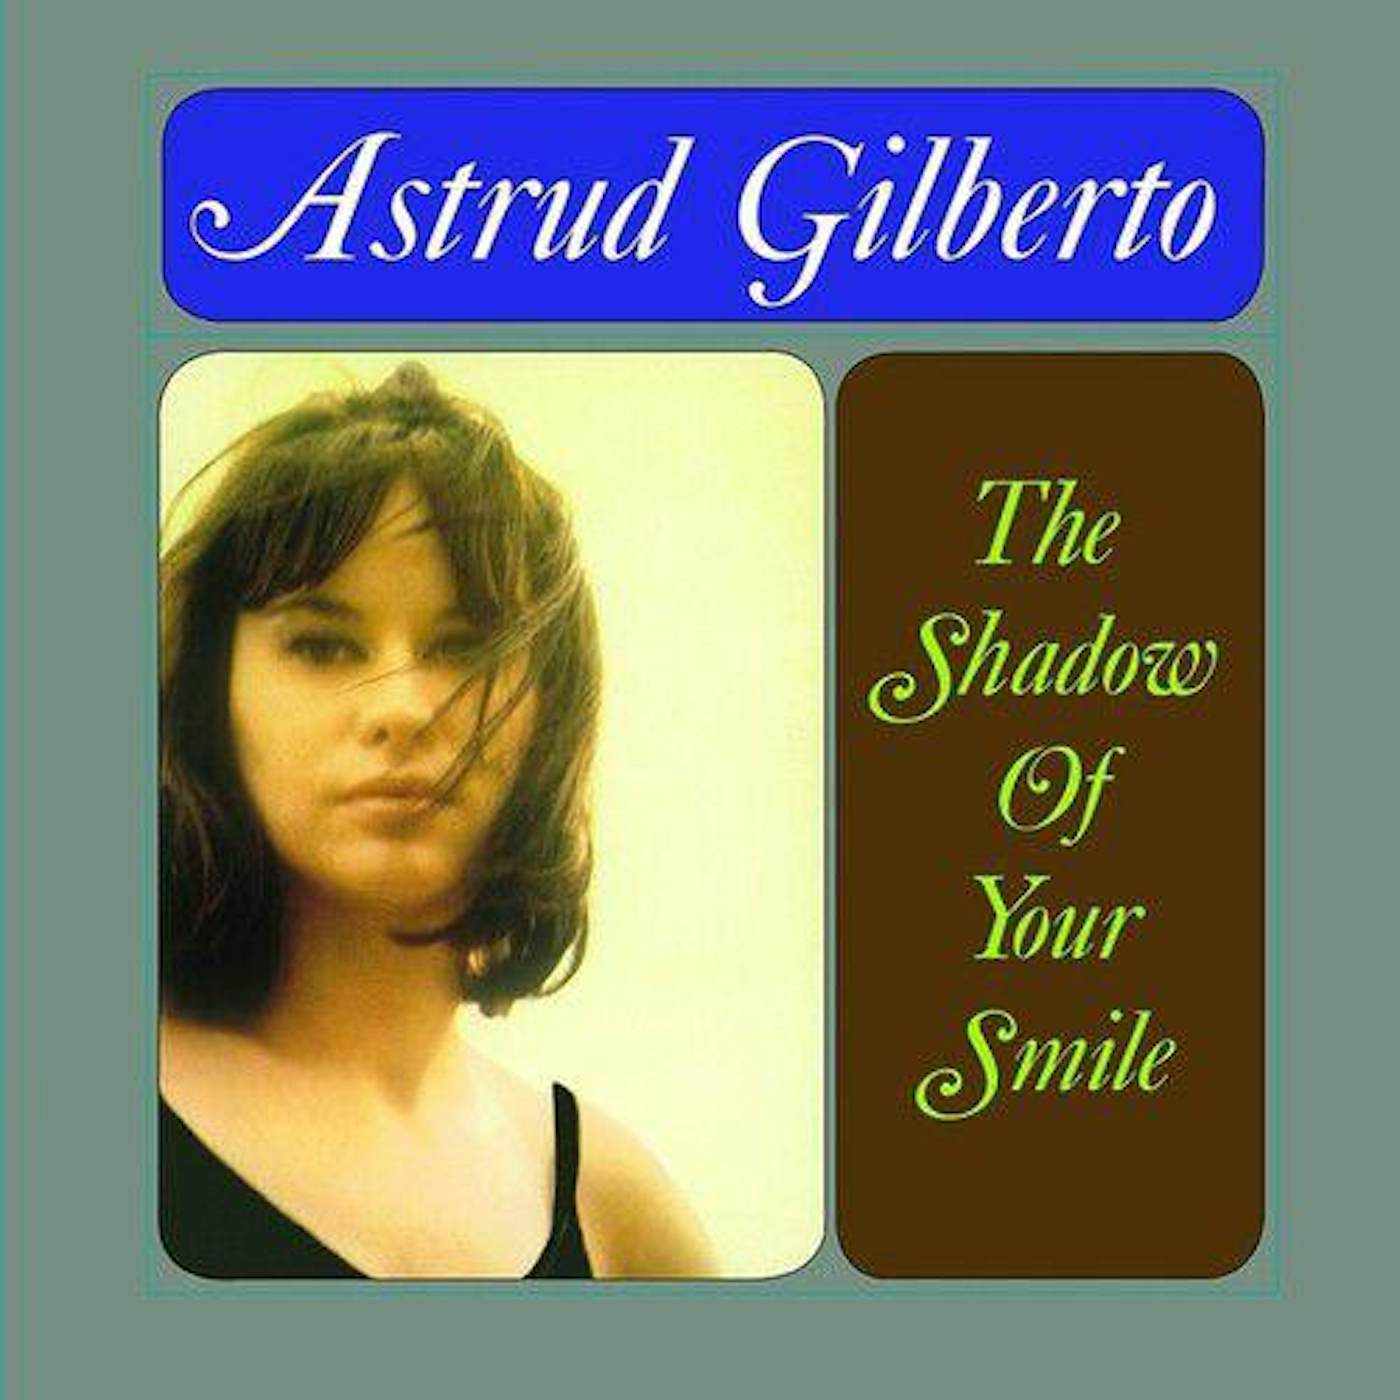 Astrud Gilberto The Shadow Of Your Smile Vinyl Record